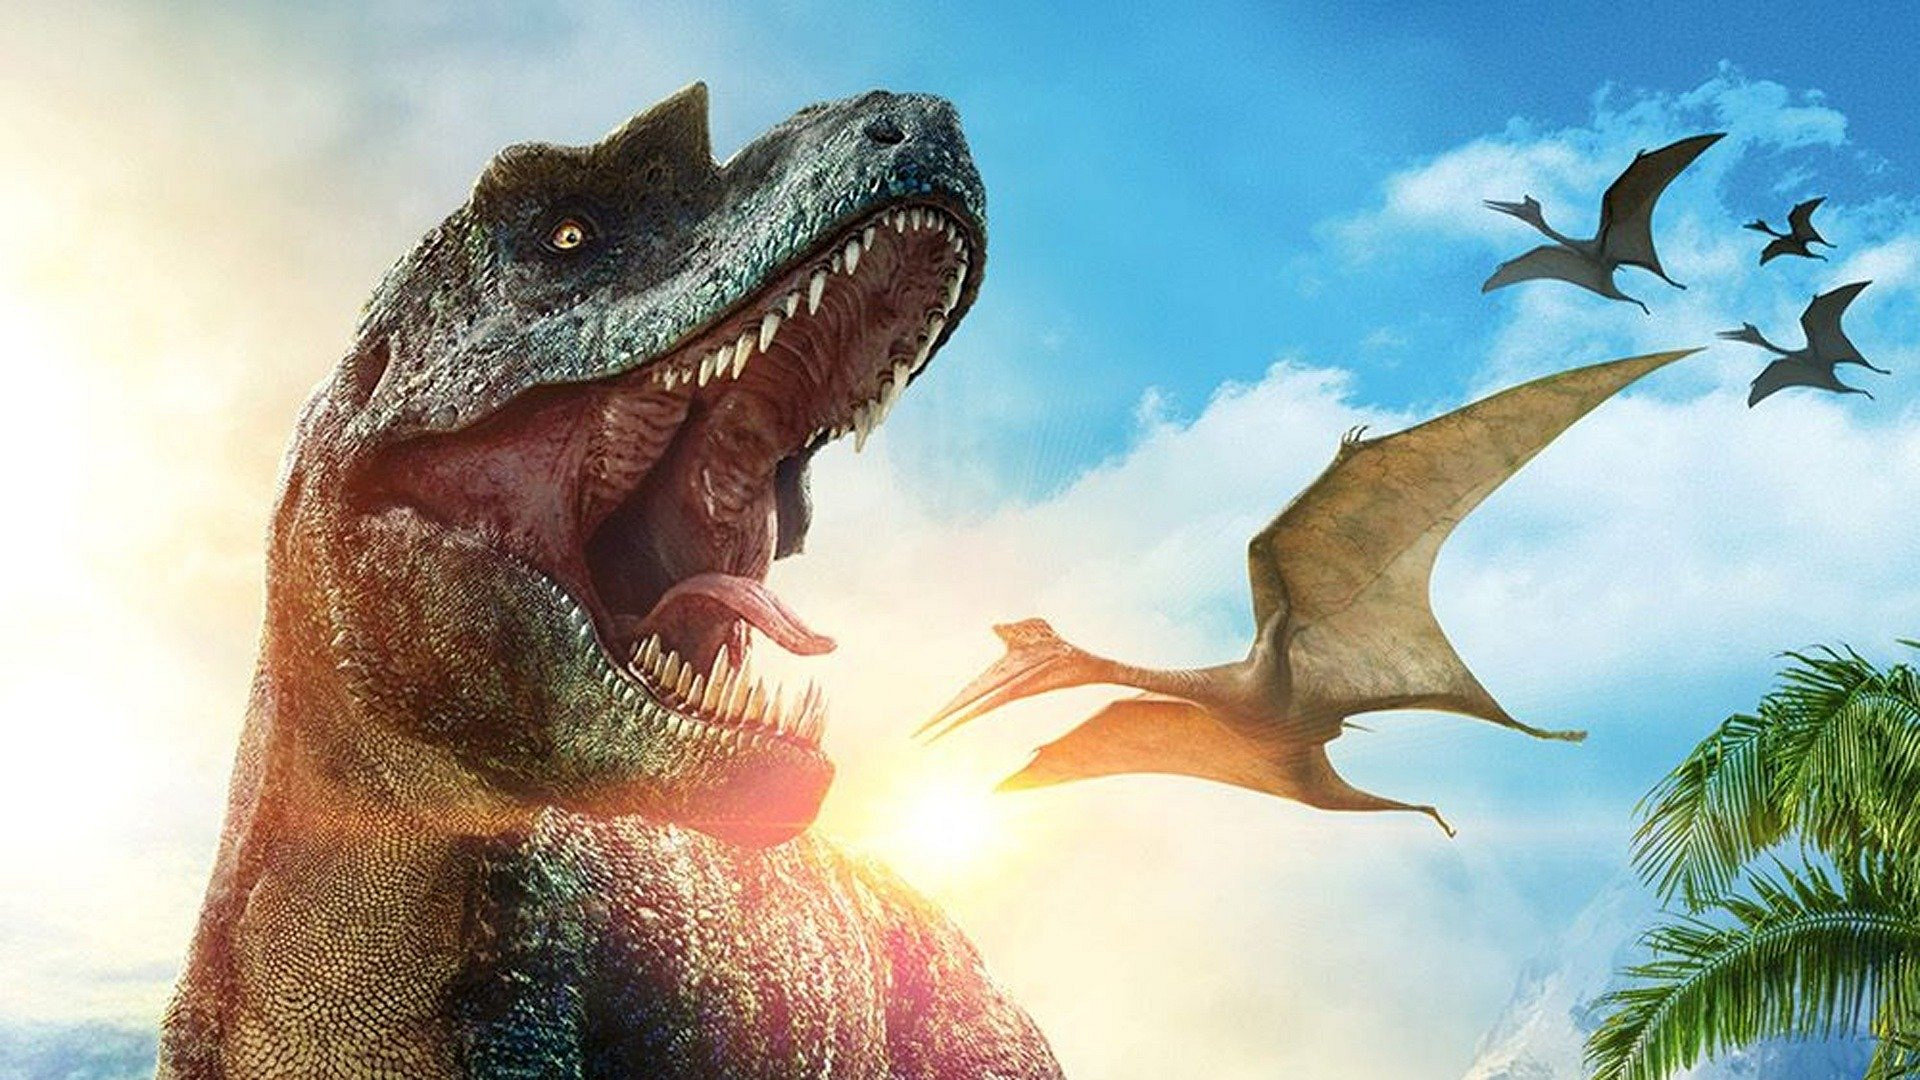 Walking with Dinosaurs: The Movie